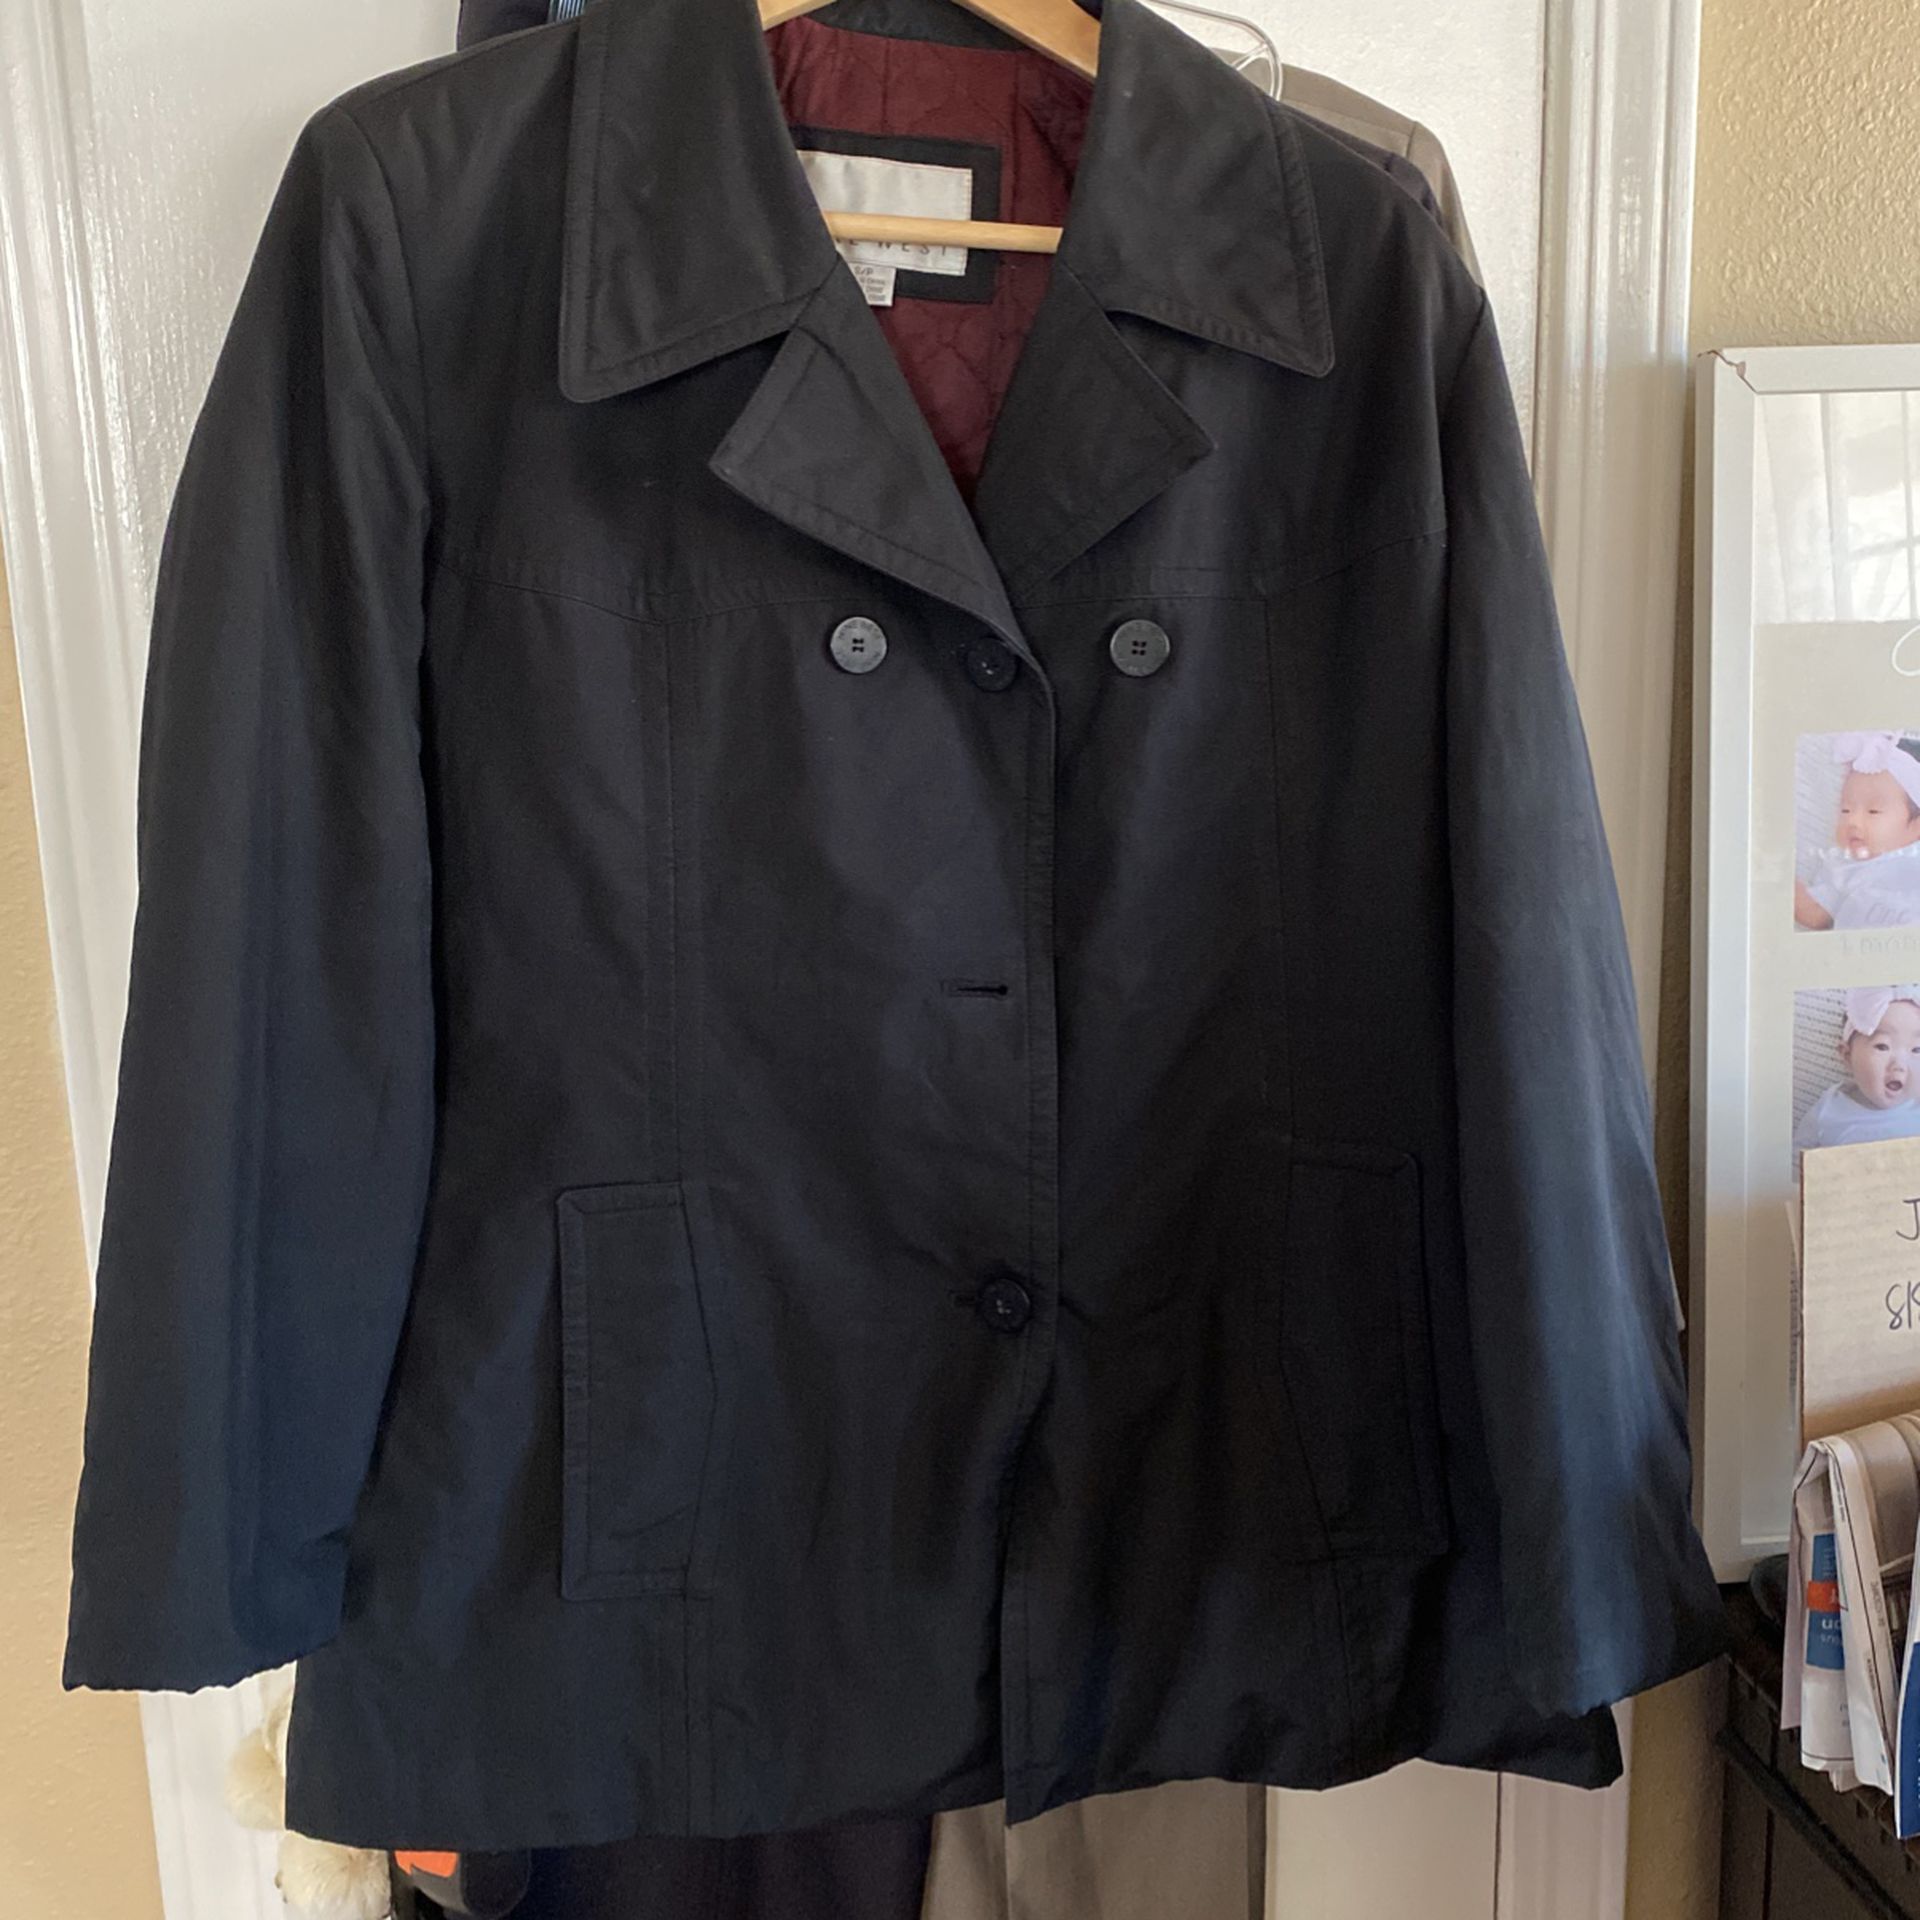 Nine West Jacket For Women for Sale in Los Angeles, CA - OfferUp